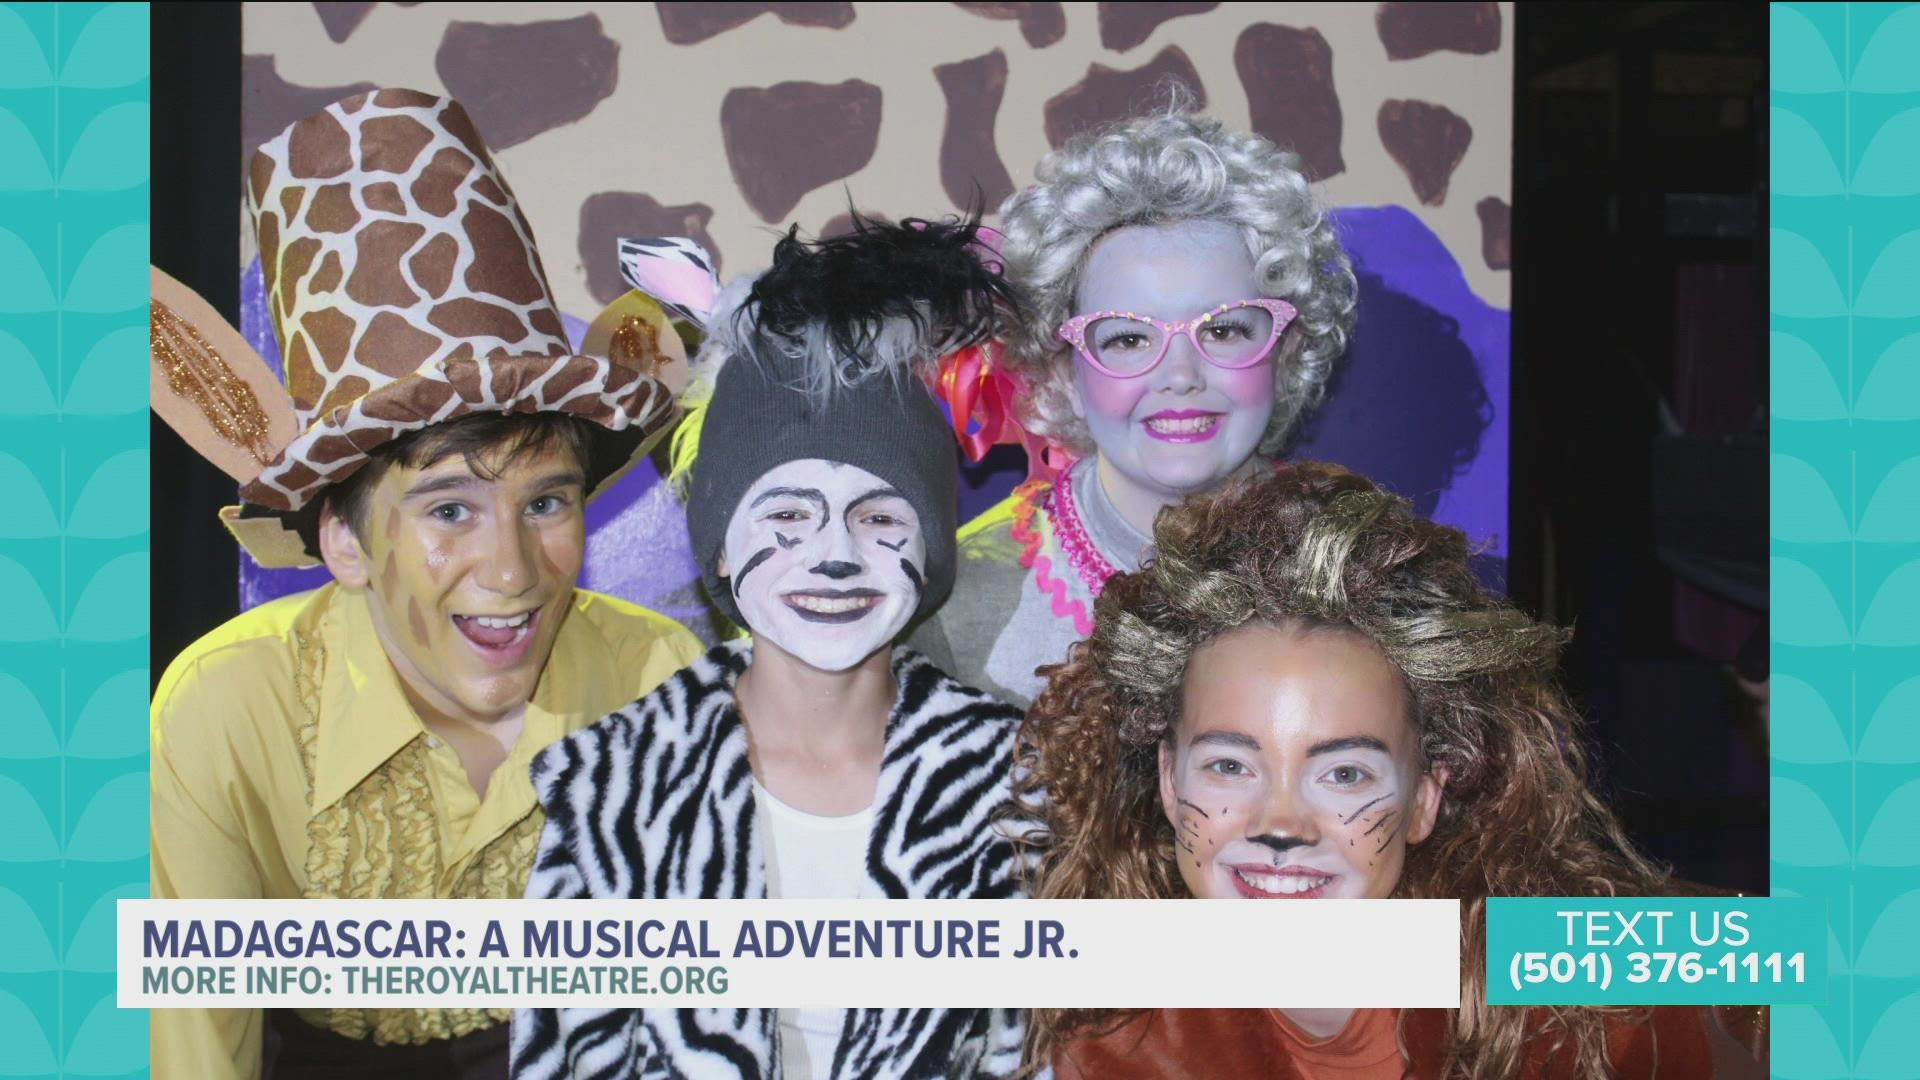 The Royal Theater in Benton has Madagascar playing May 12 - 15 and tickets are still available.